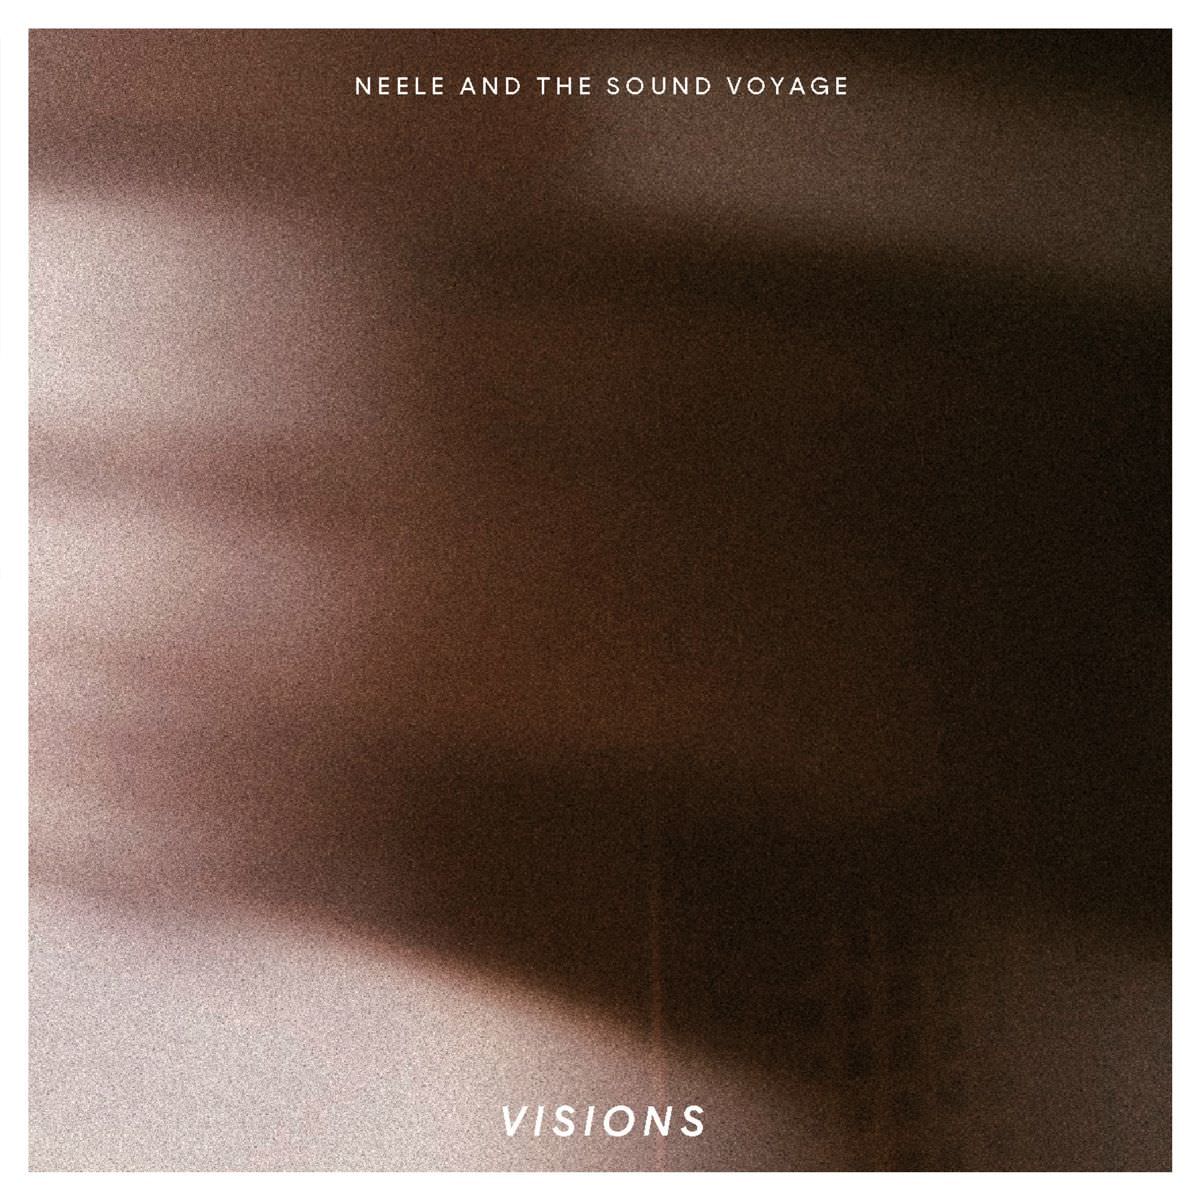 Neele and The Sound Voyage - Visions (2018) [Qobuz FLAC 24bit/44,1kHz]